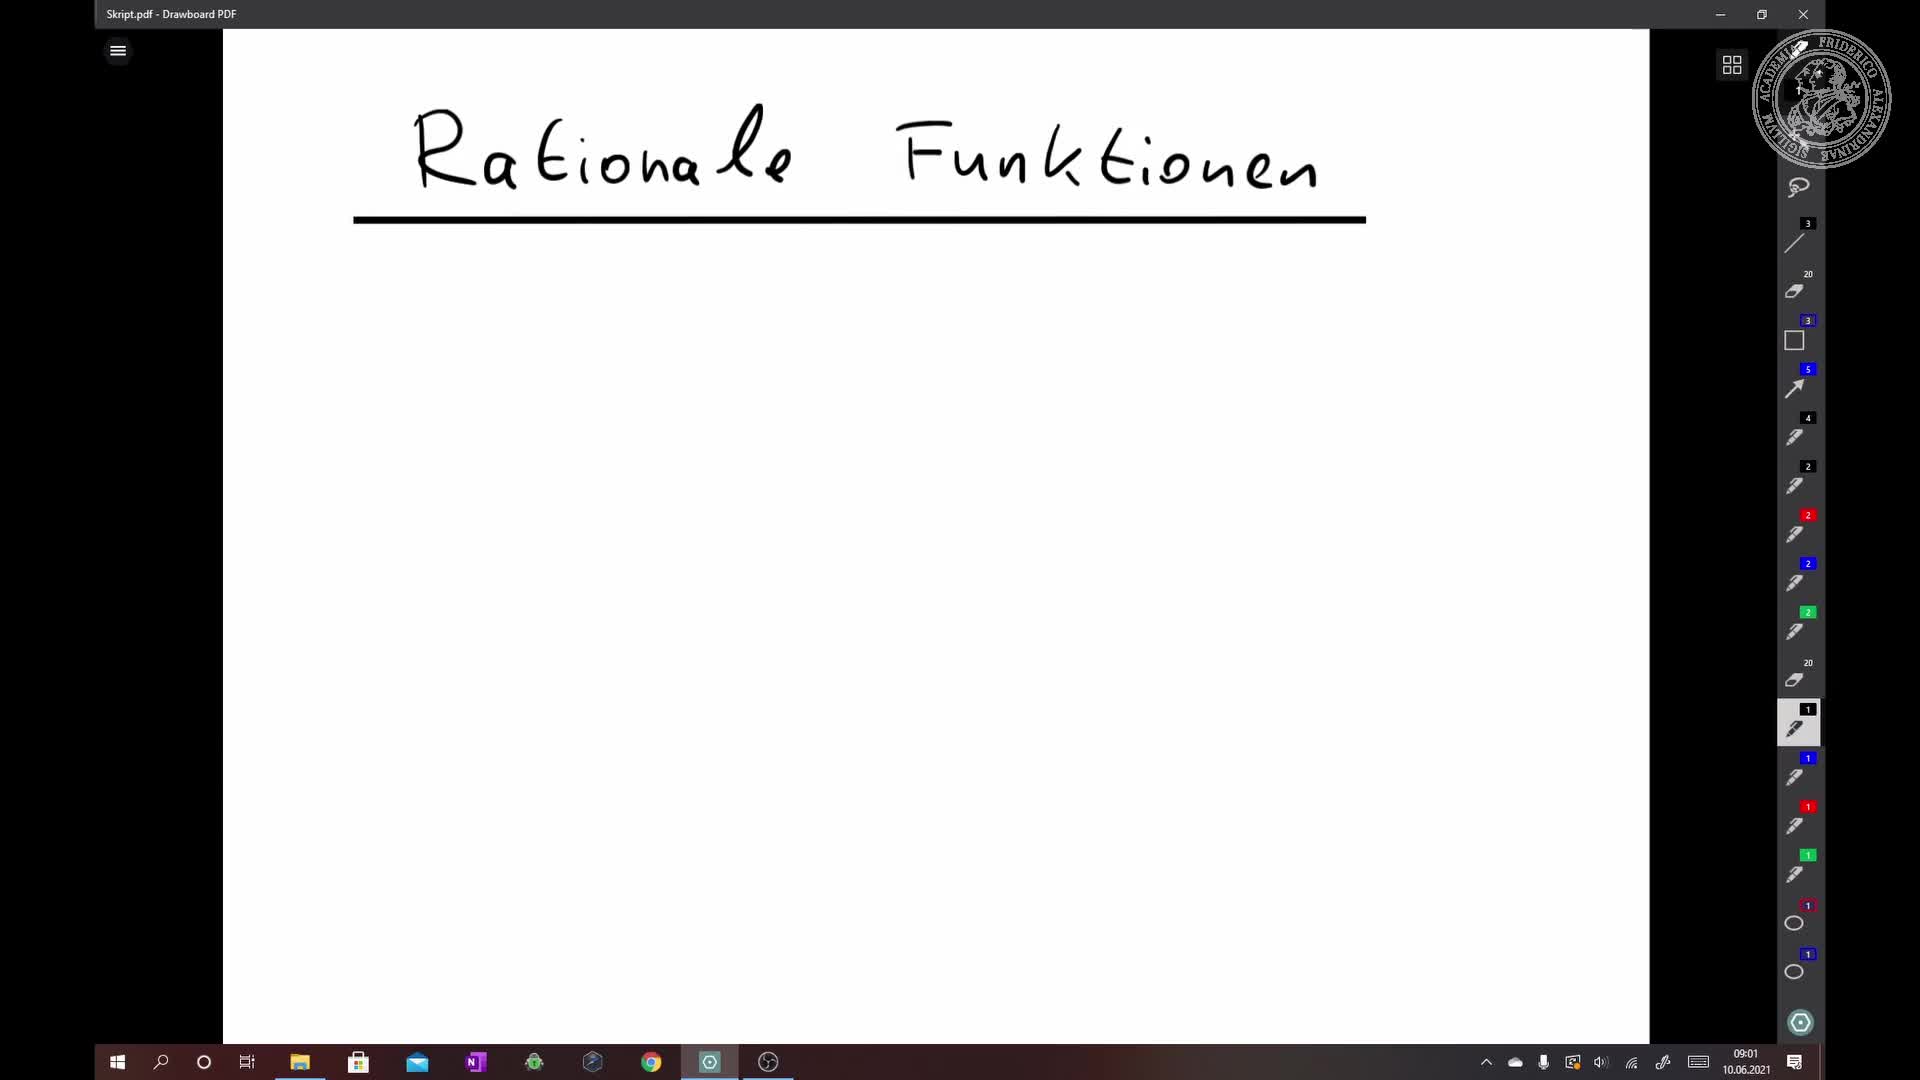 Rationale Funktionen preview image